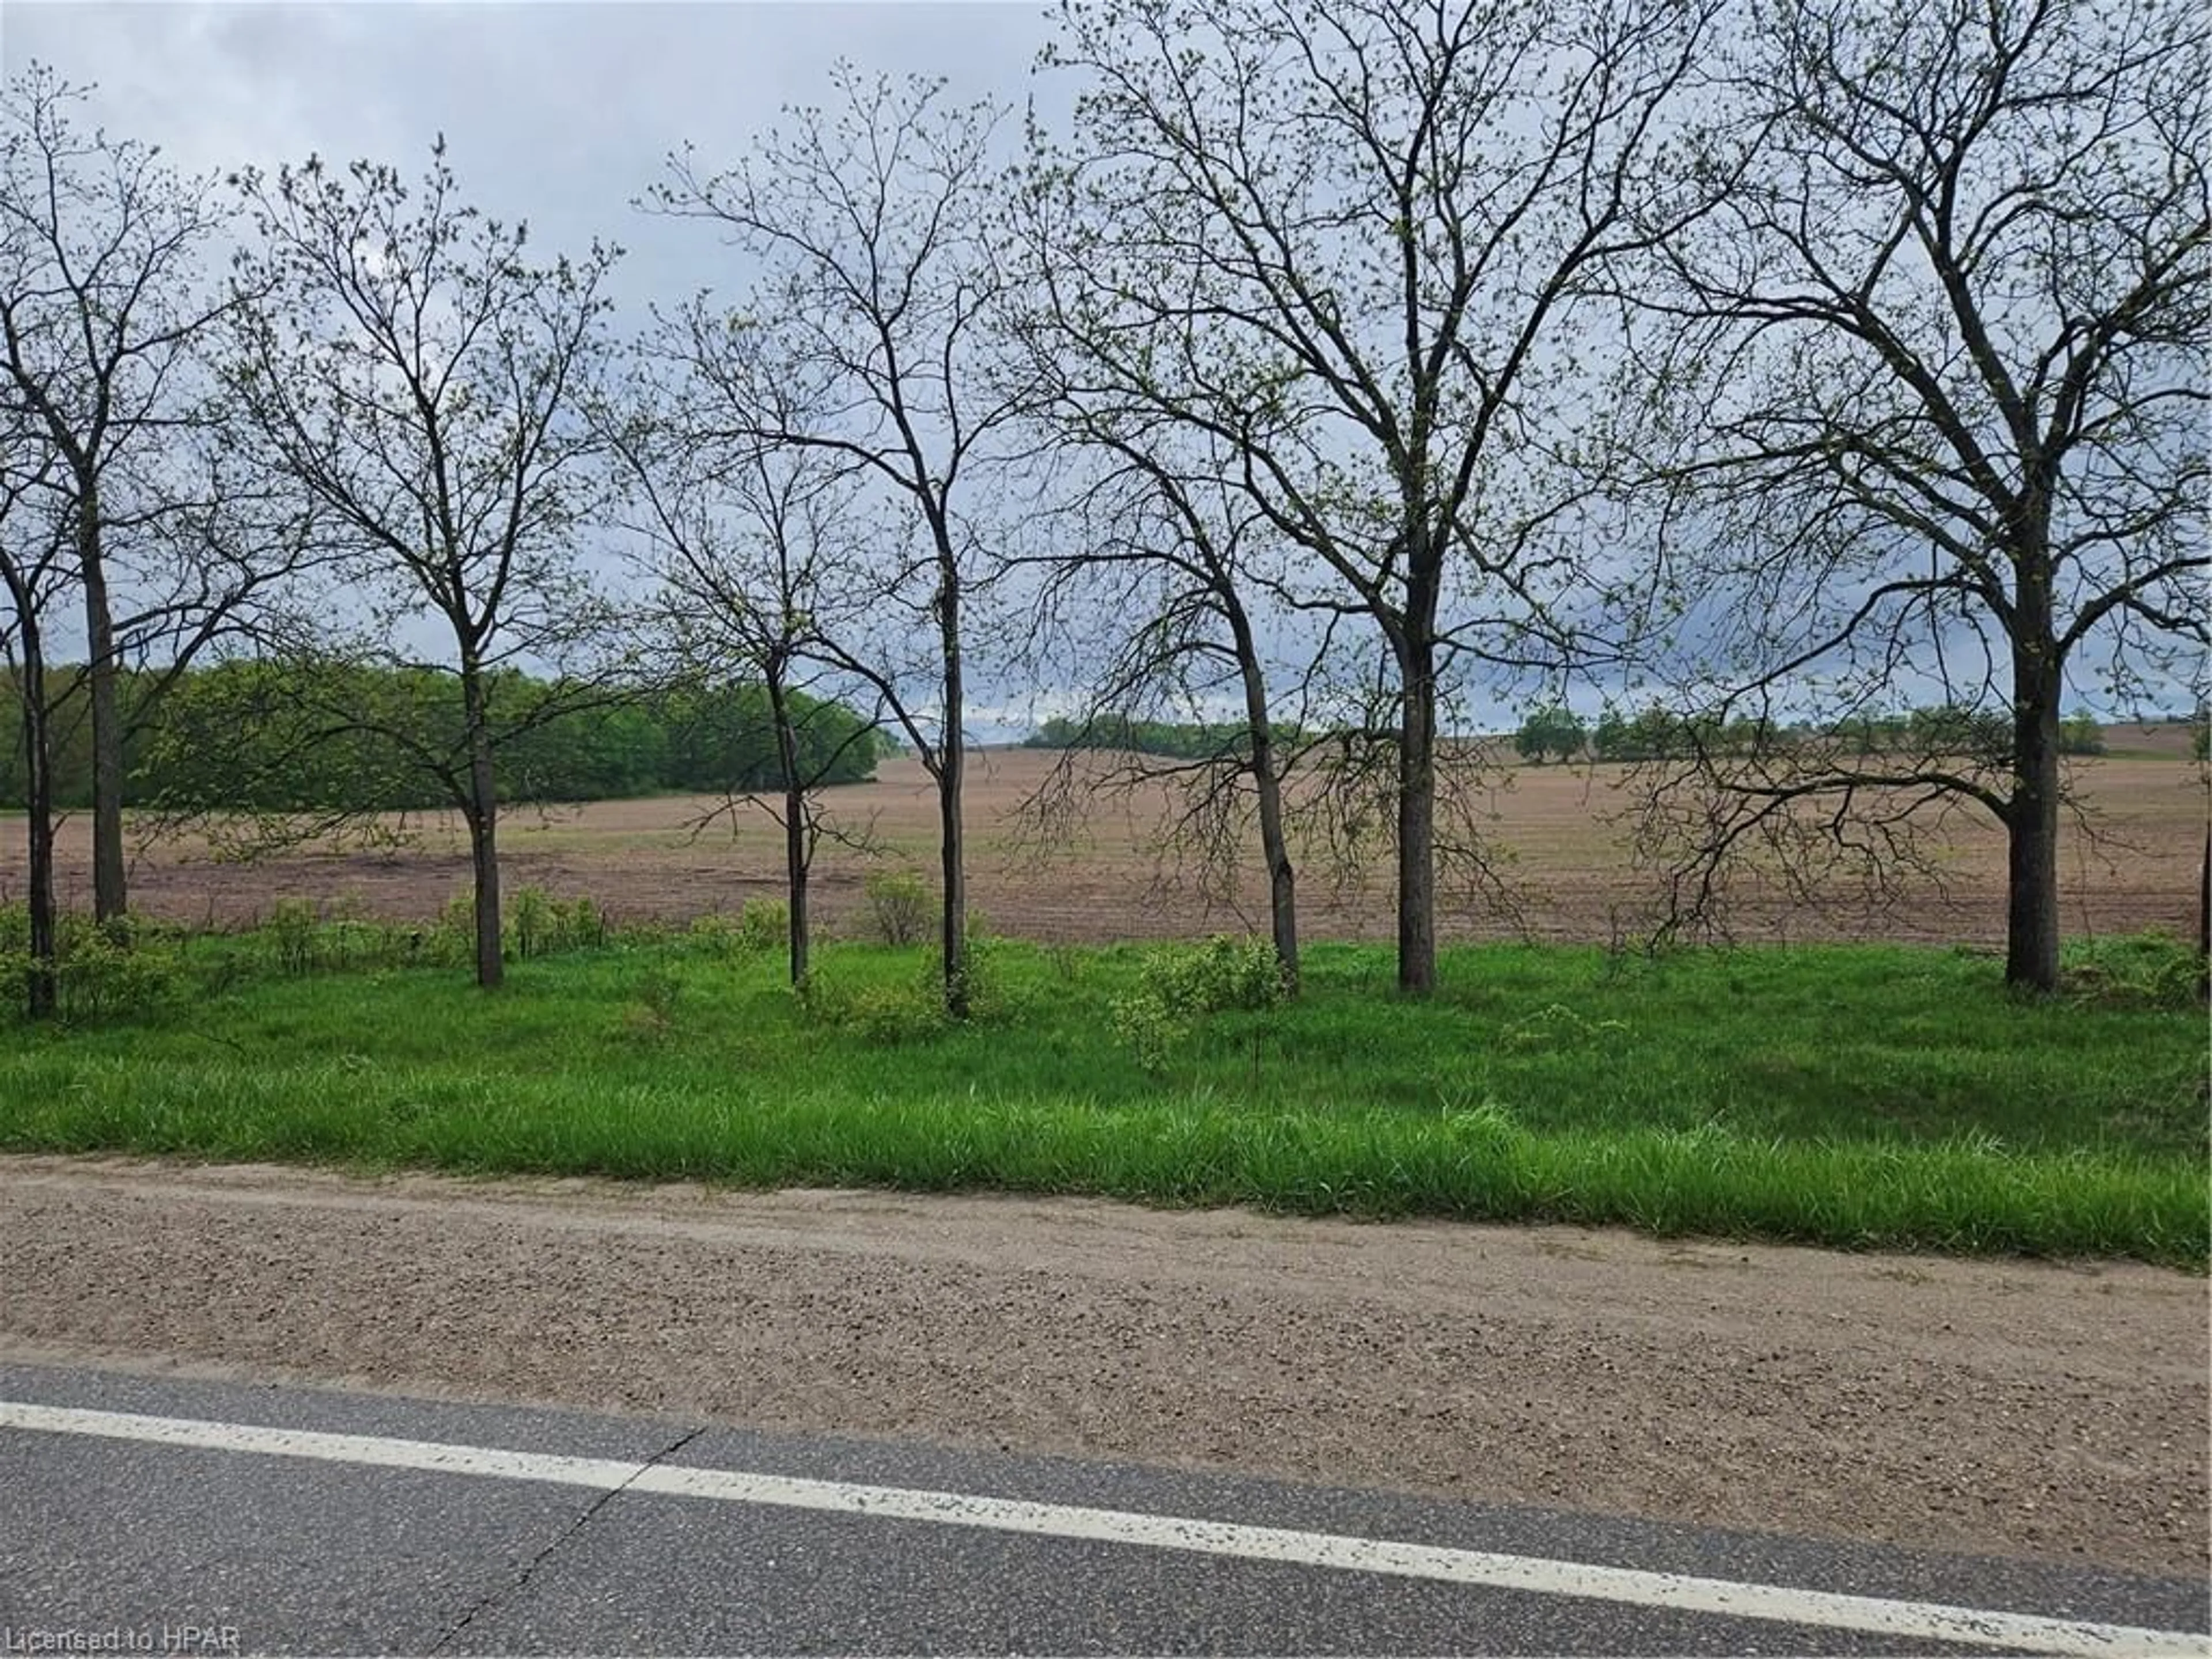 Street view for LOT 4 Parr Line Line, Holmesville Ontario N0M 1L0